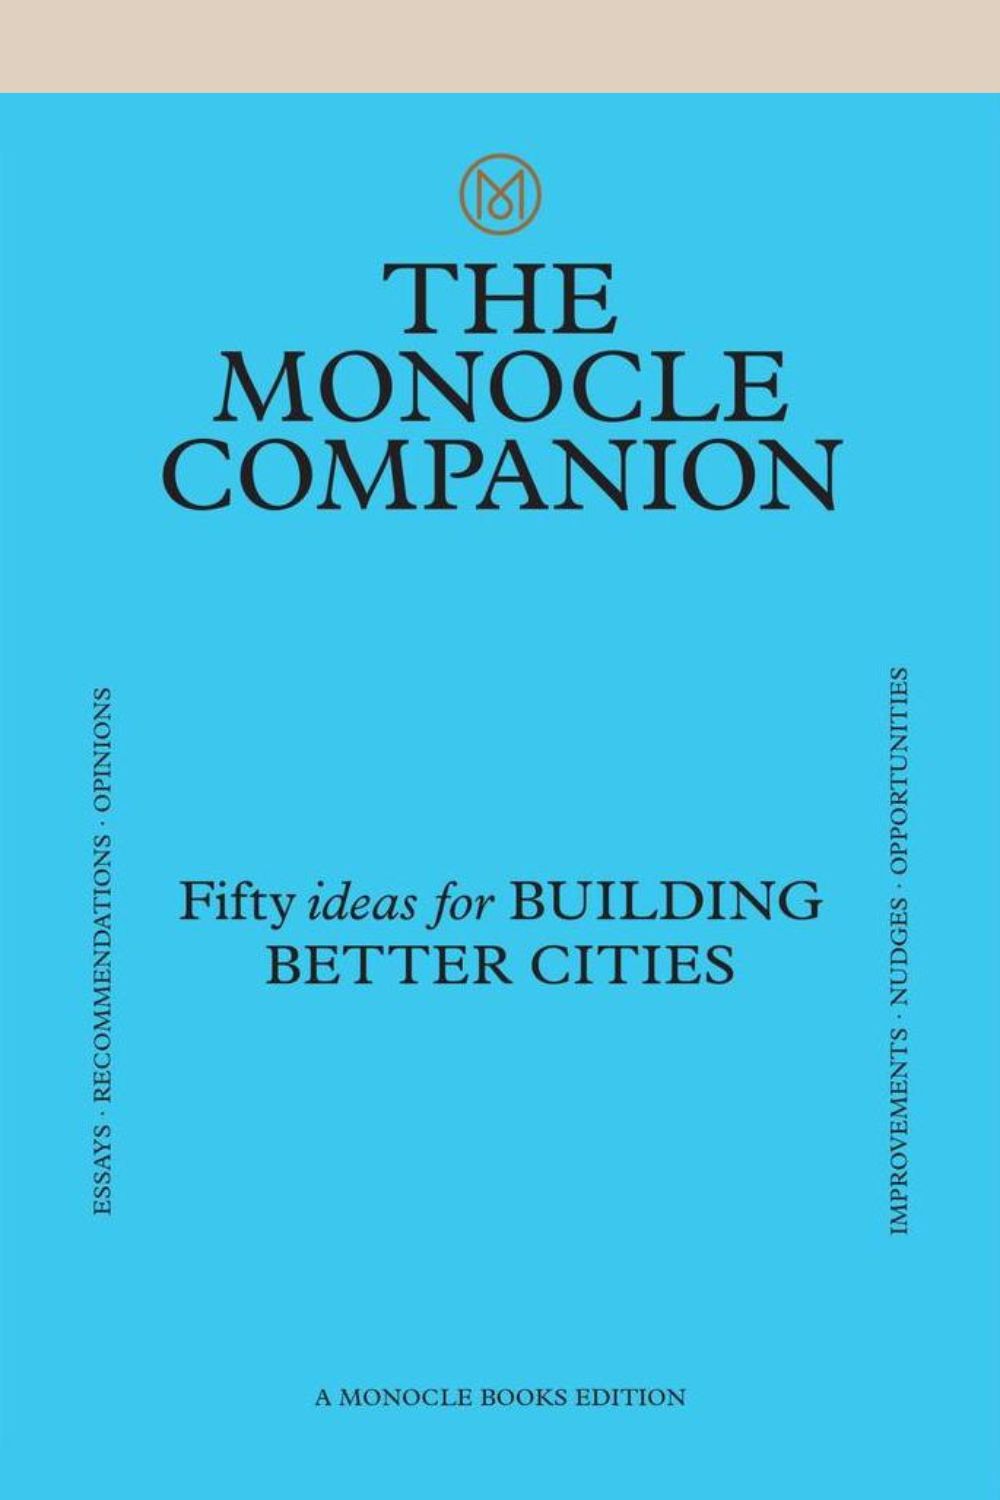 Monocle Companion No. 4 "Fifty Ideas for Better Cities" (blue cover)